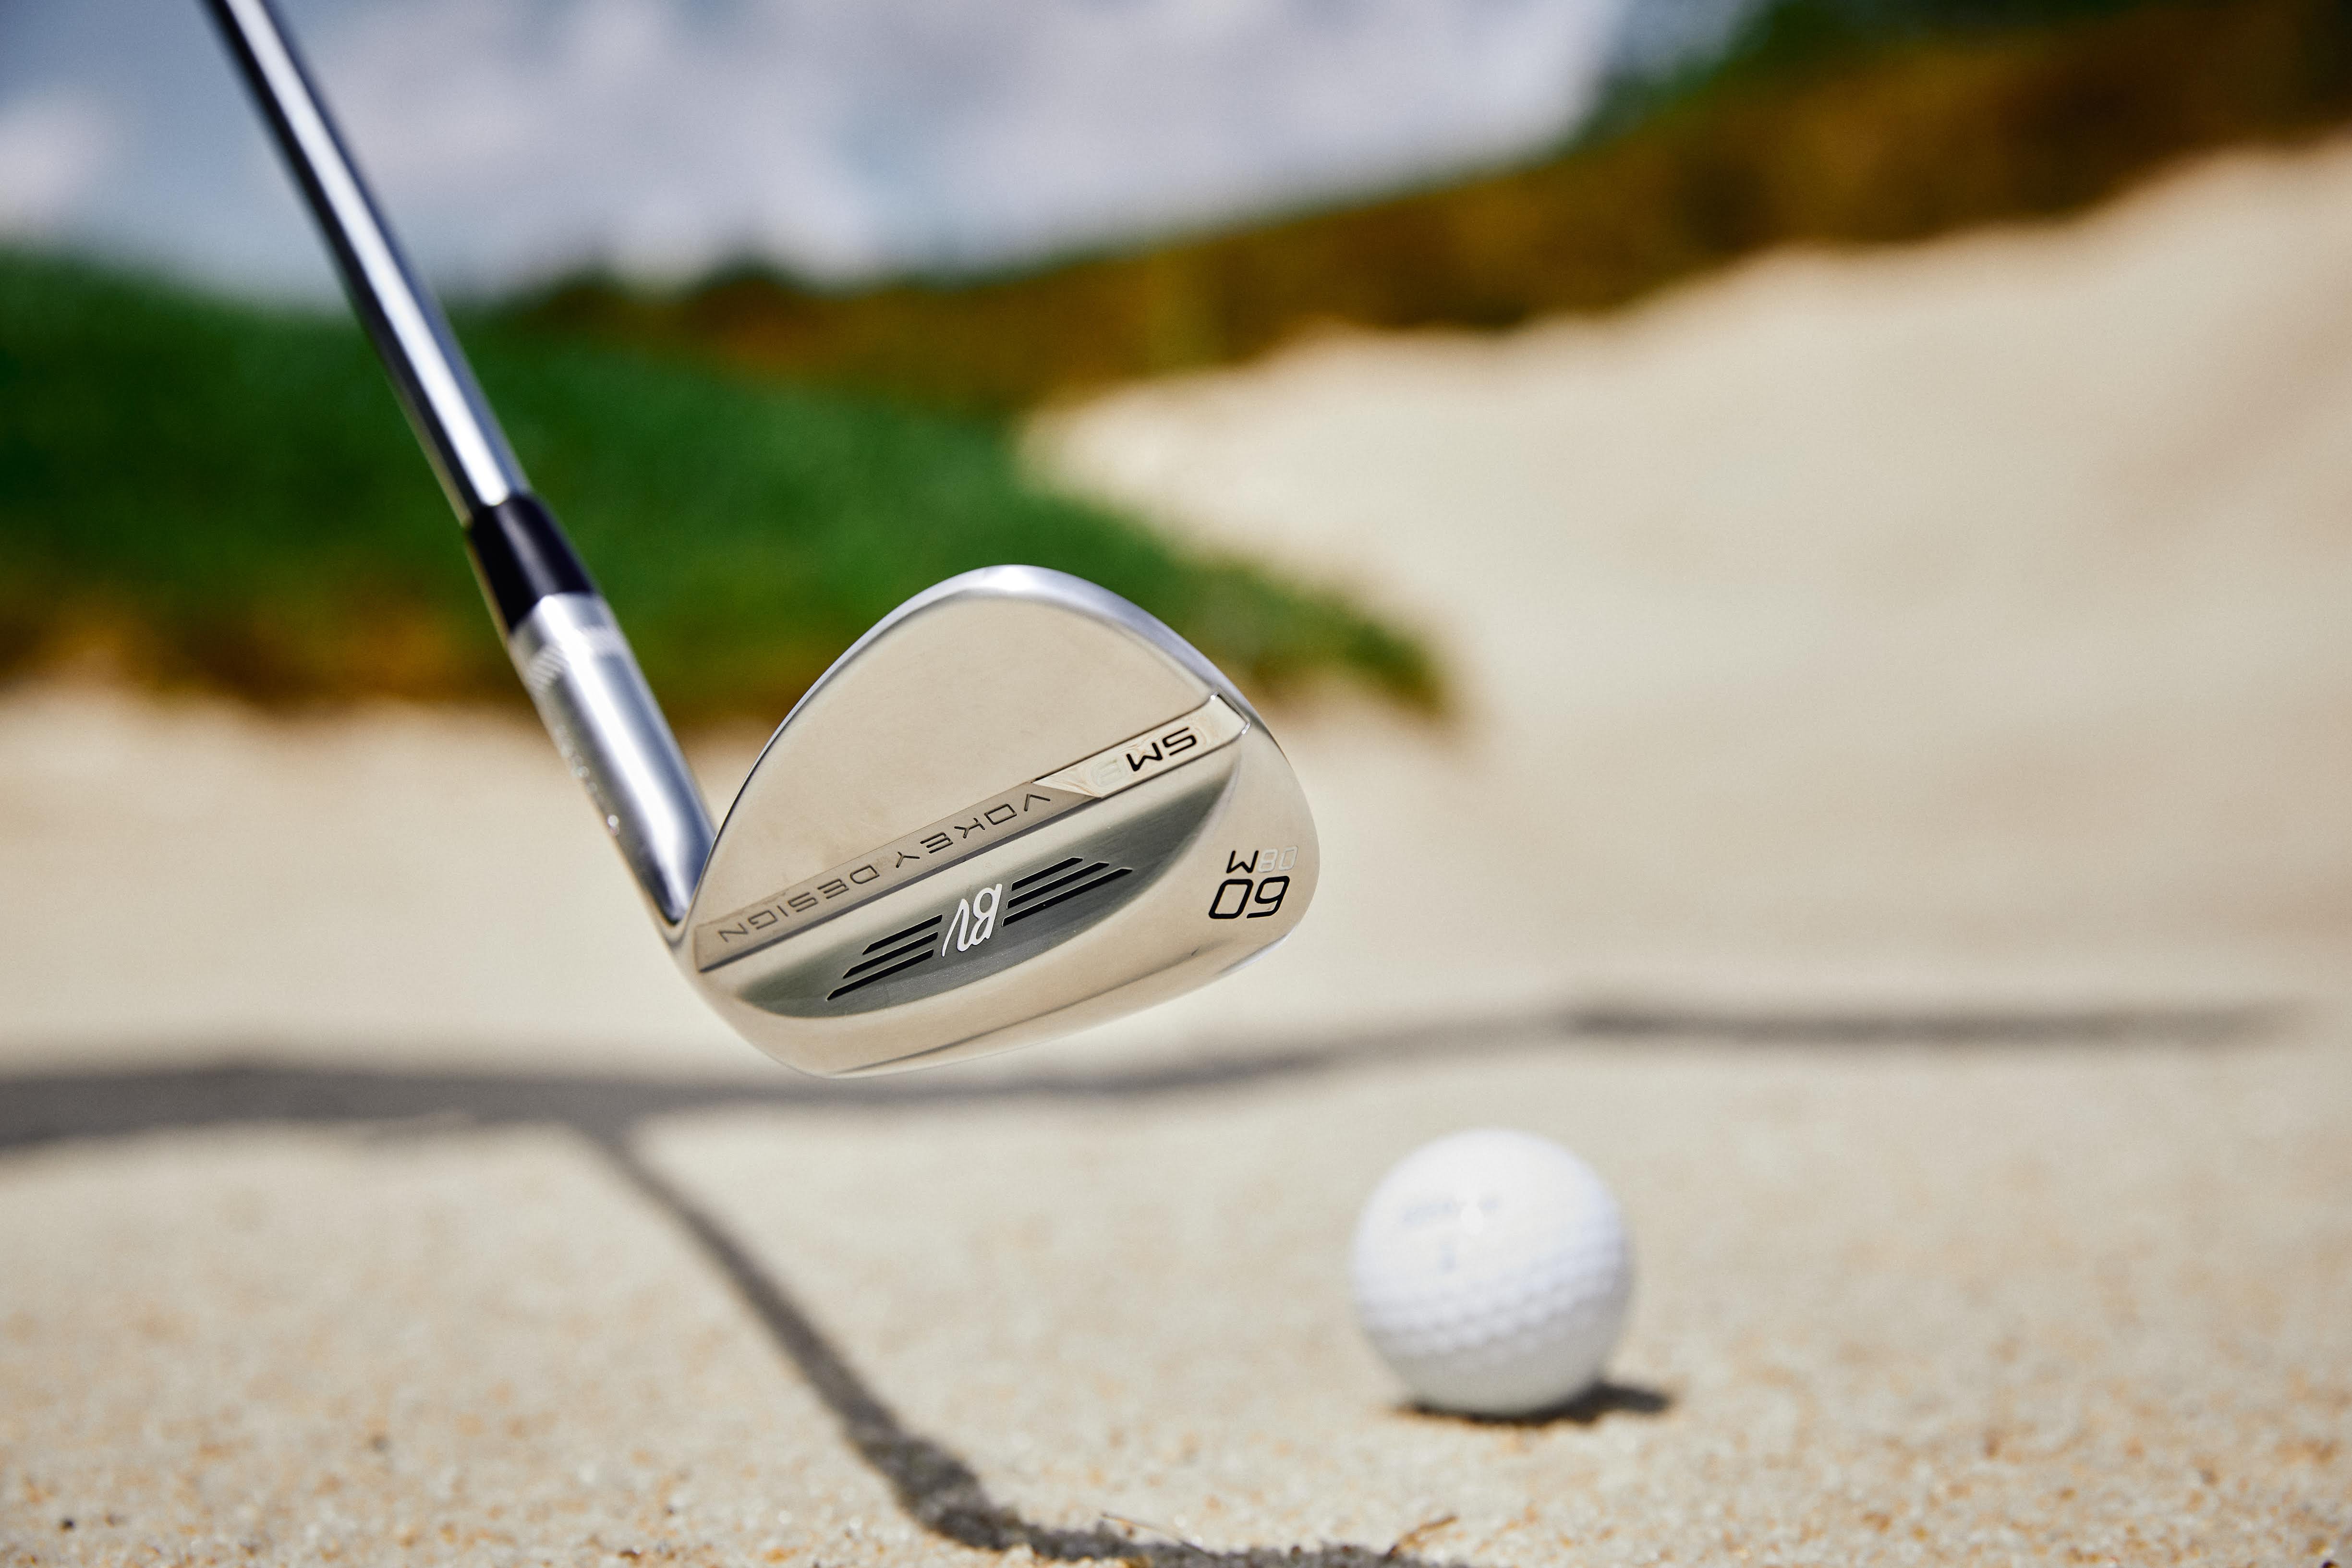 Titleist Vokey SM8 wedges debut on PGA Tour at this week's RSM Classic